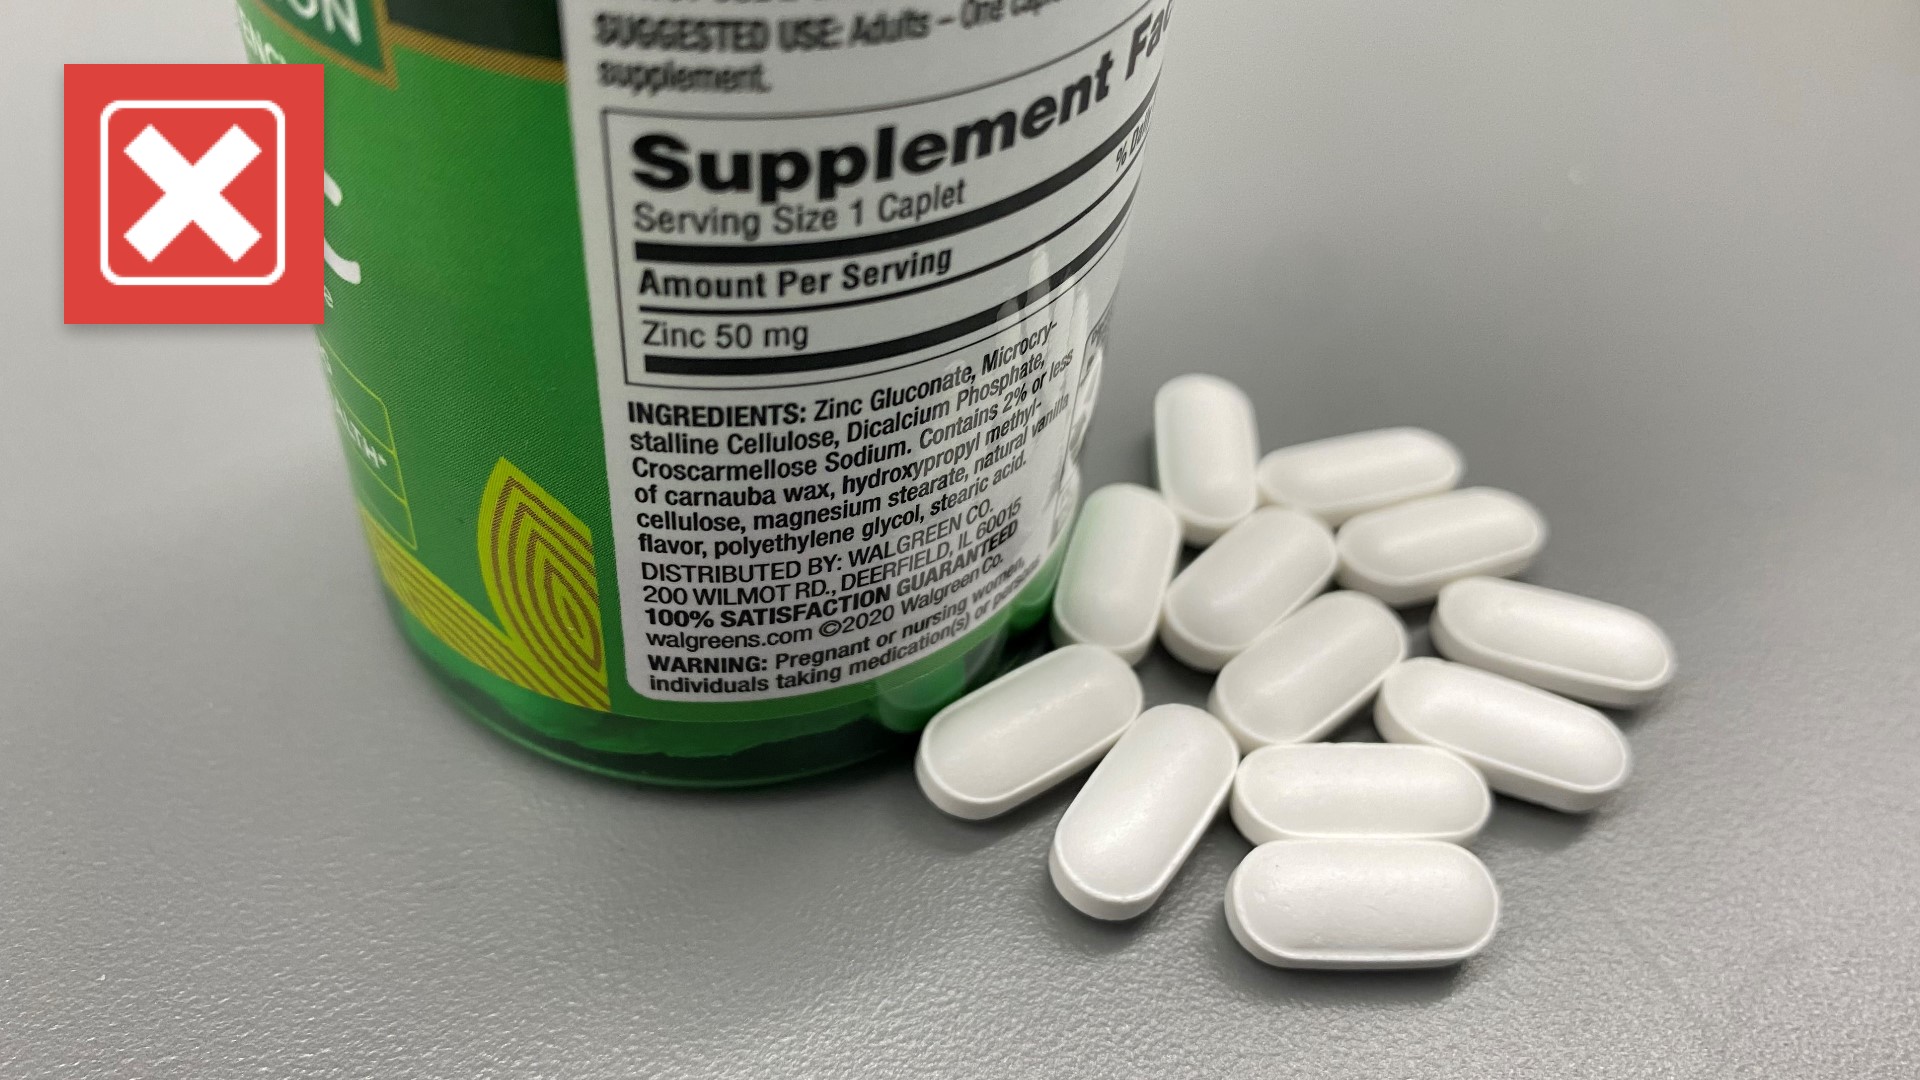 The National Institutes of Health and two OhioHealth doctors advised against using zinc supplementation above the recommended dietary amount to prevent COVID-19.